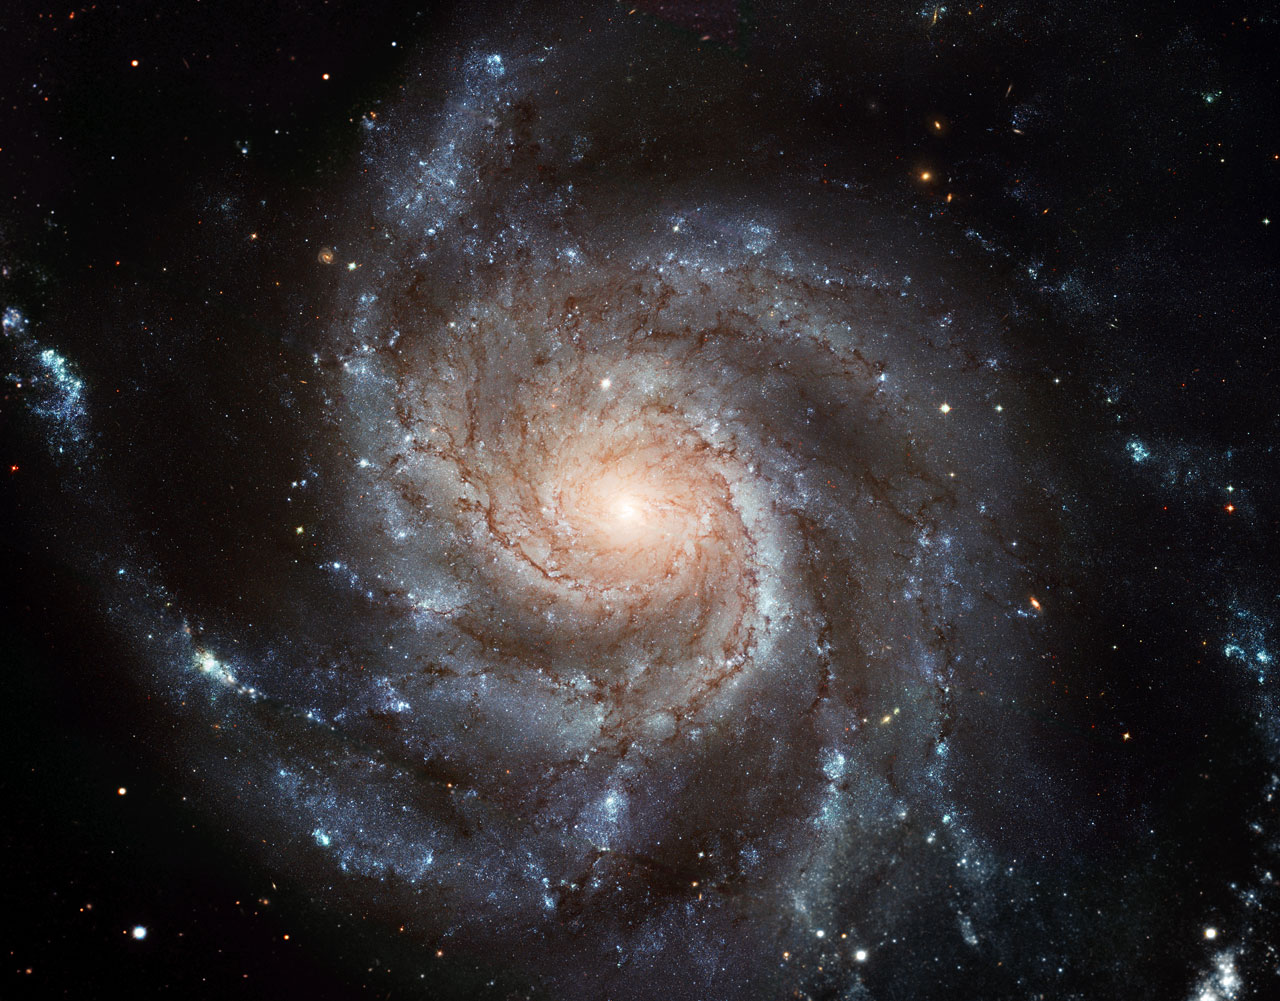 The gigantic Pinwheel galaxy, one of the best known examples of “grand design spirals”, and its supergiant star-forming regions in unprecedented detail. Like UGC 4459, it’s situated on Ursa Major, via ESA/NASA